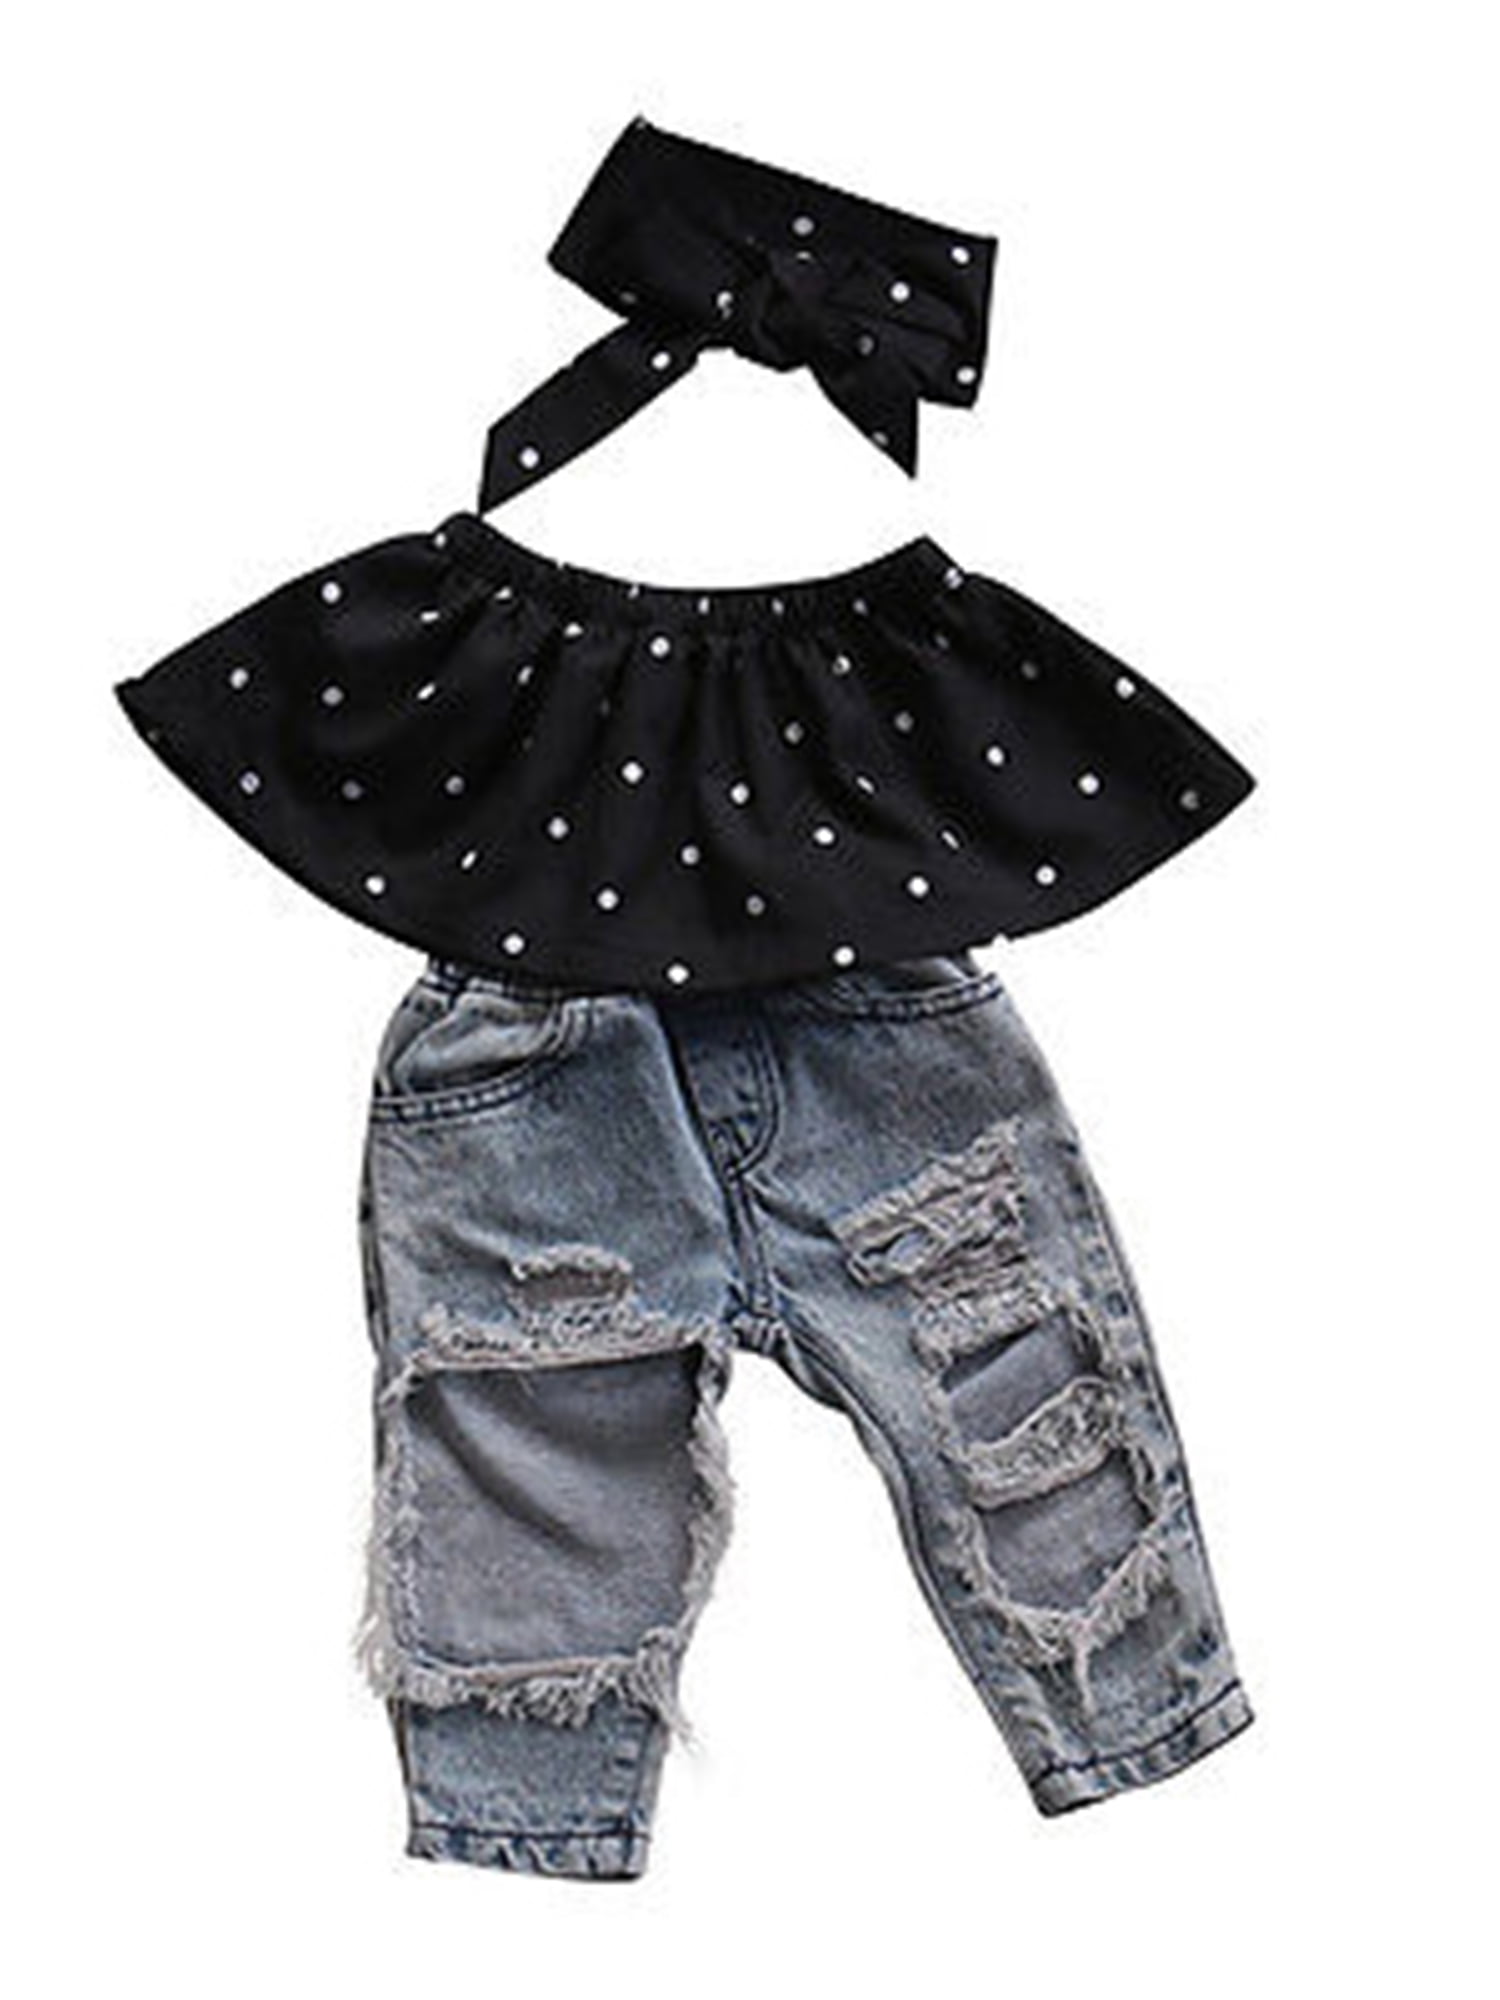 Toddler Infant Baby Girls Fly Sleeve T-Shirt Top+Polka Dot Shorts Pants Clothes Outfits Set